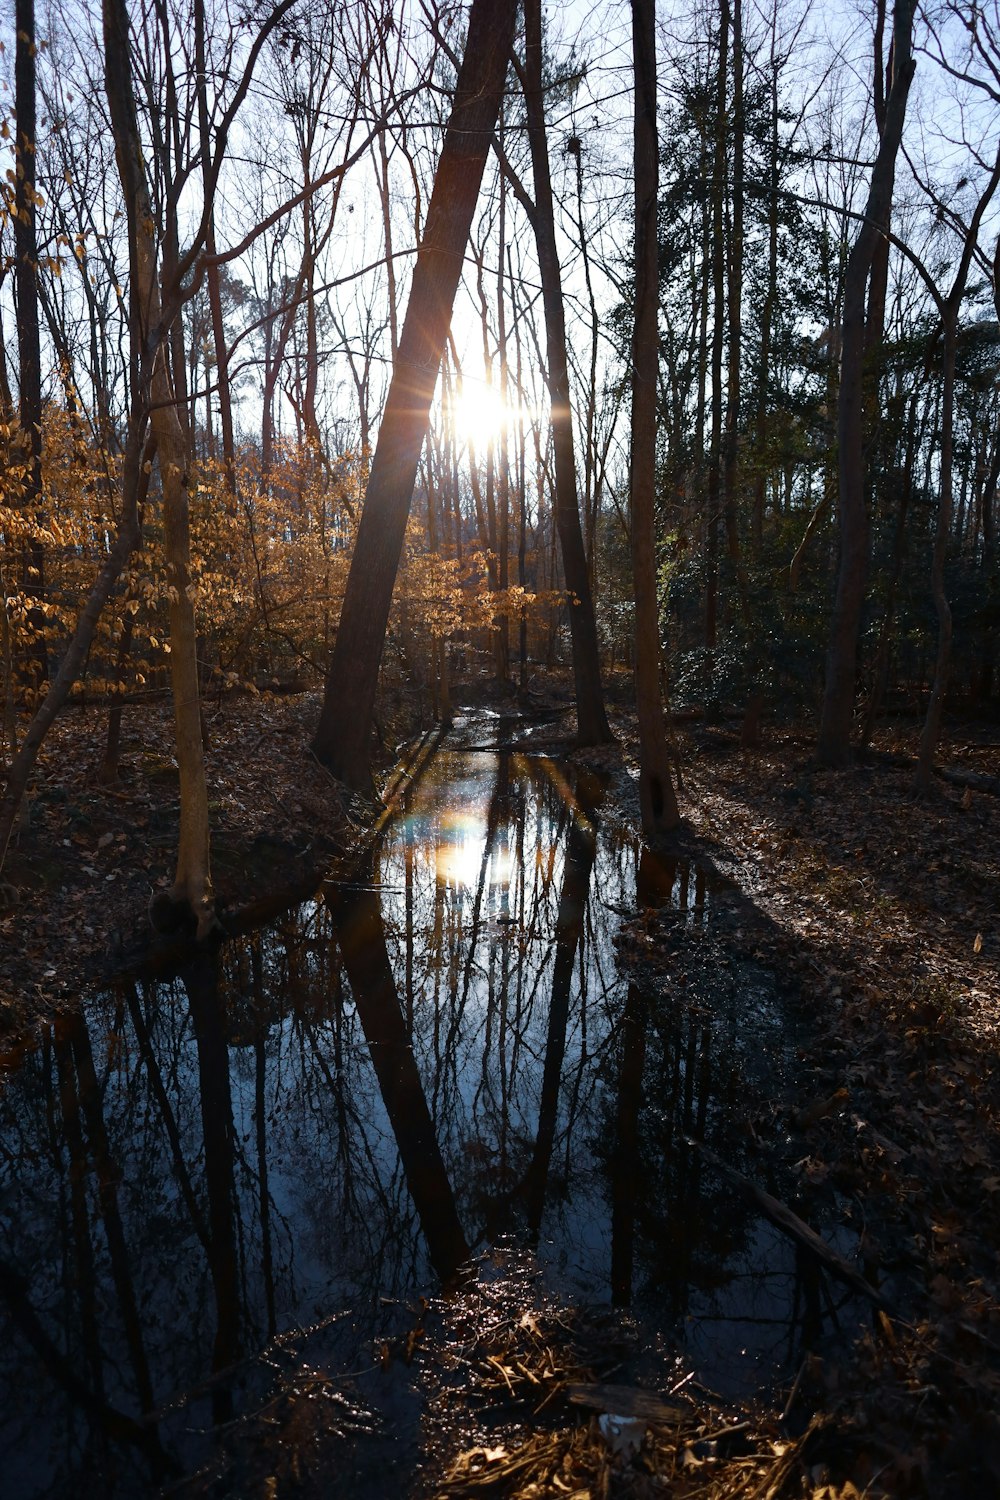 the sun is shining through the trees and reflecting in the water